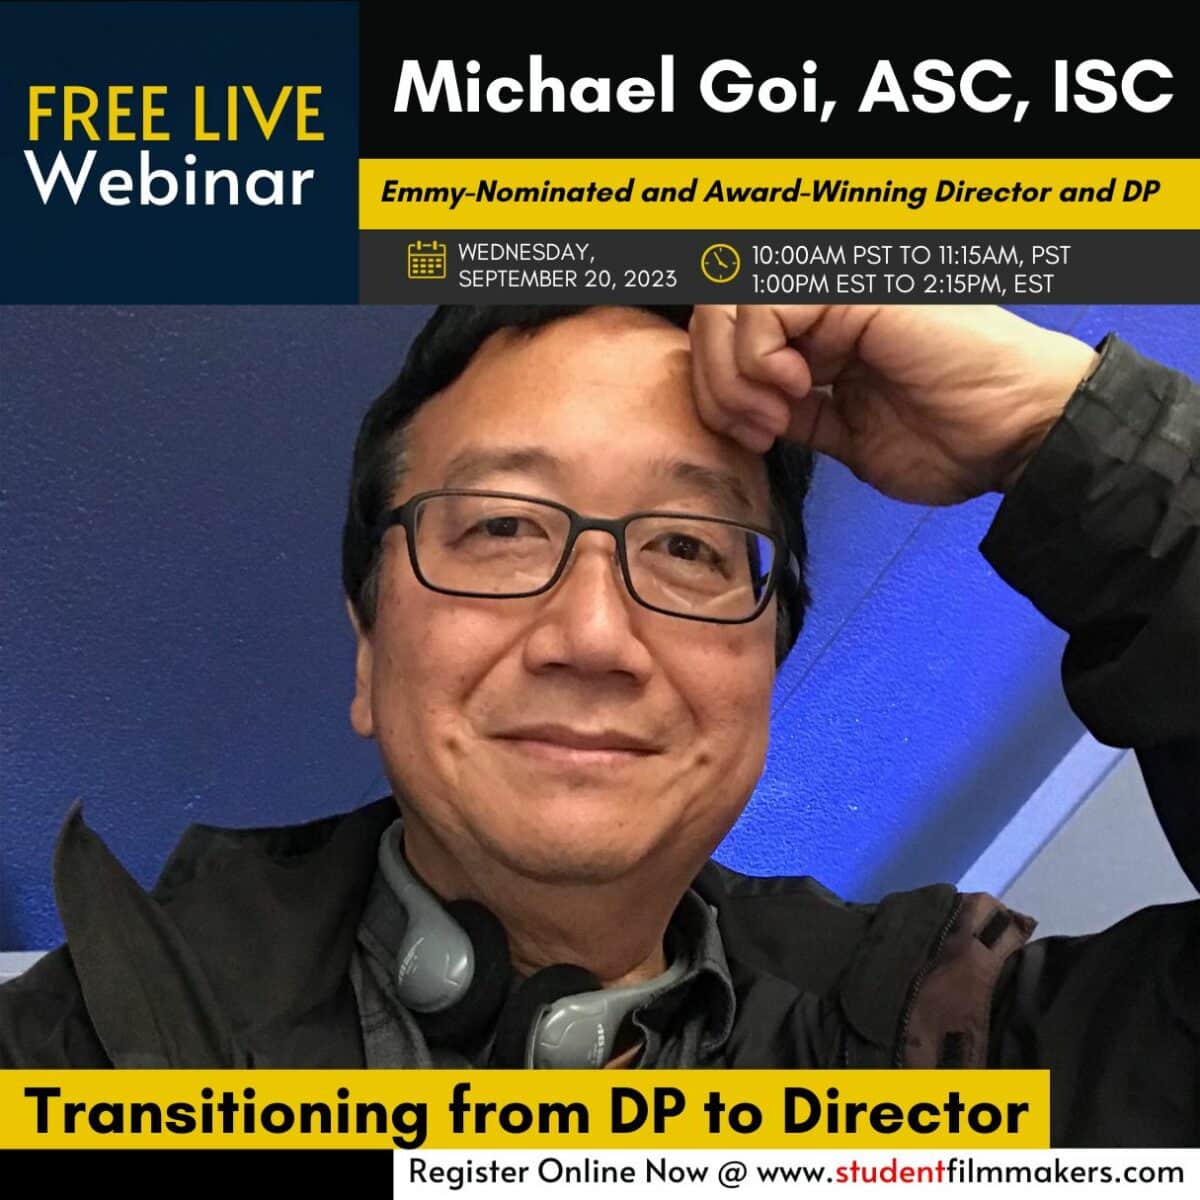 Register FREE! Webinar Starts Soon! Learn How to Transition from DP to Director - Led by Emmy-Nominated DP / Director Michael Goi, ASC, ISC